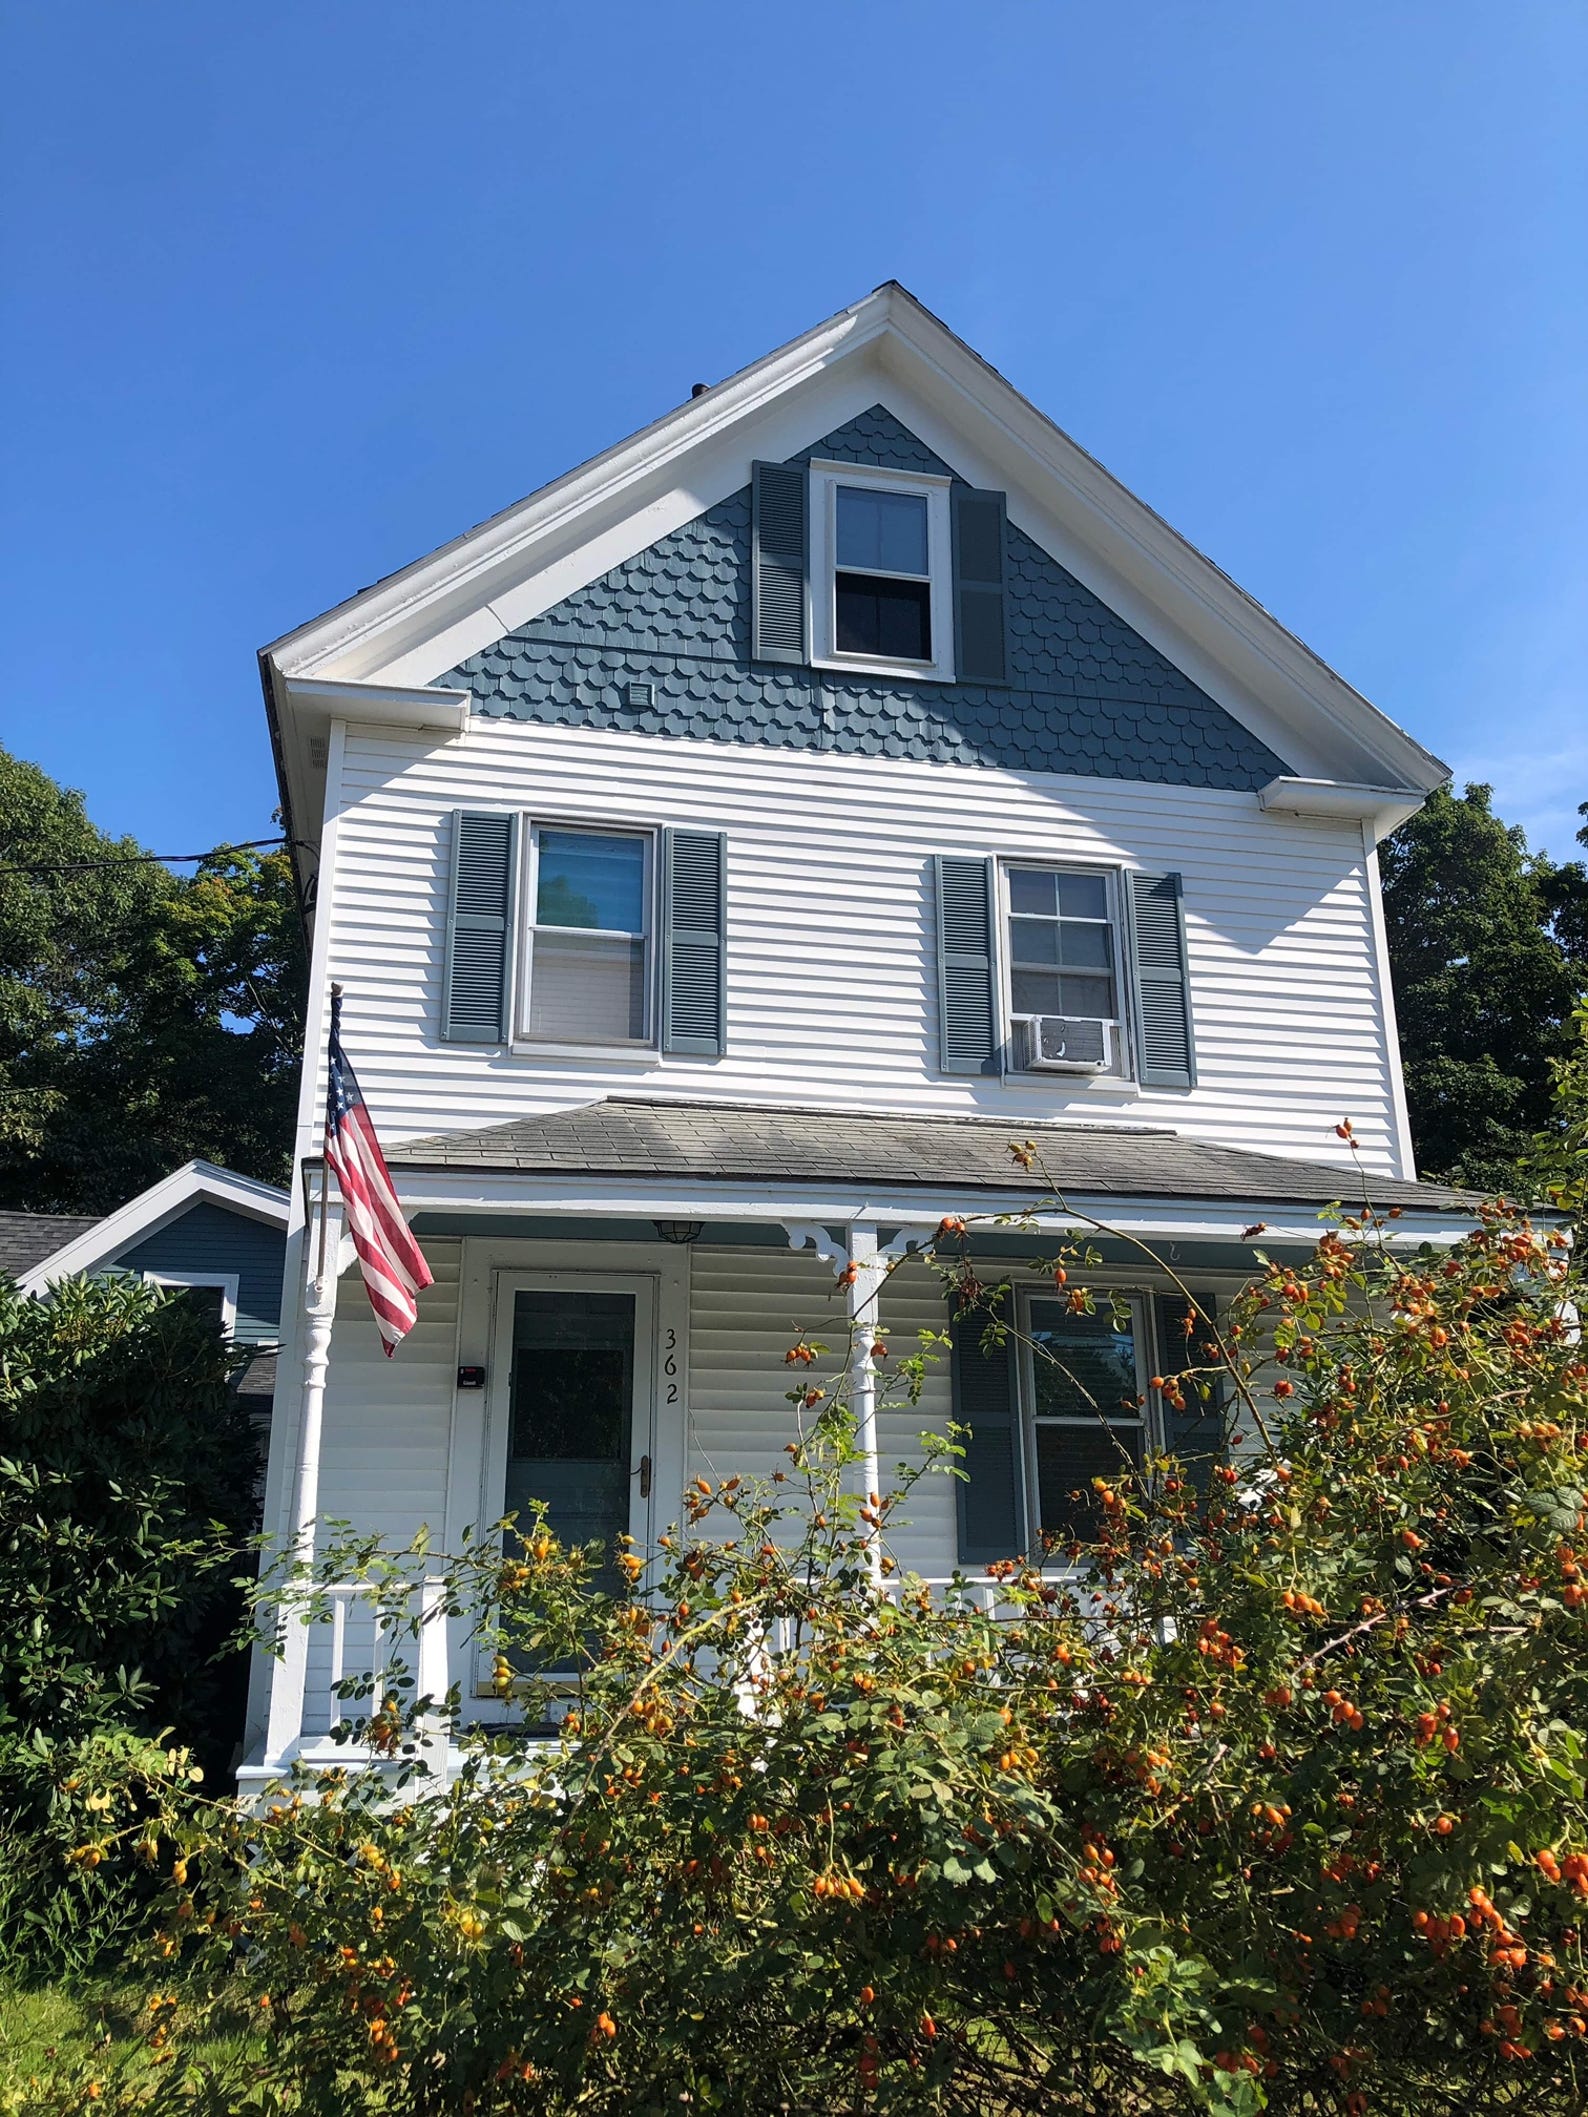 This house at 366 Sagamore Raod in Rye was byuilt by Supply Foss Trefethen. At the intersection of Sagamore and Clark Avenue, the spot was once know as Trefethen's Corner.